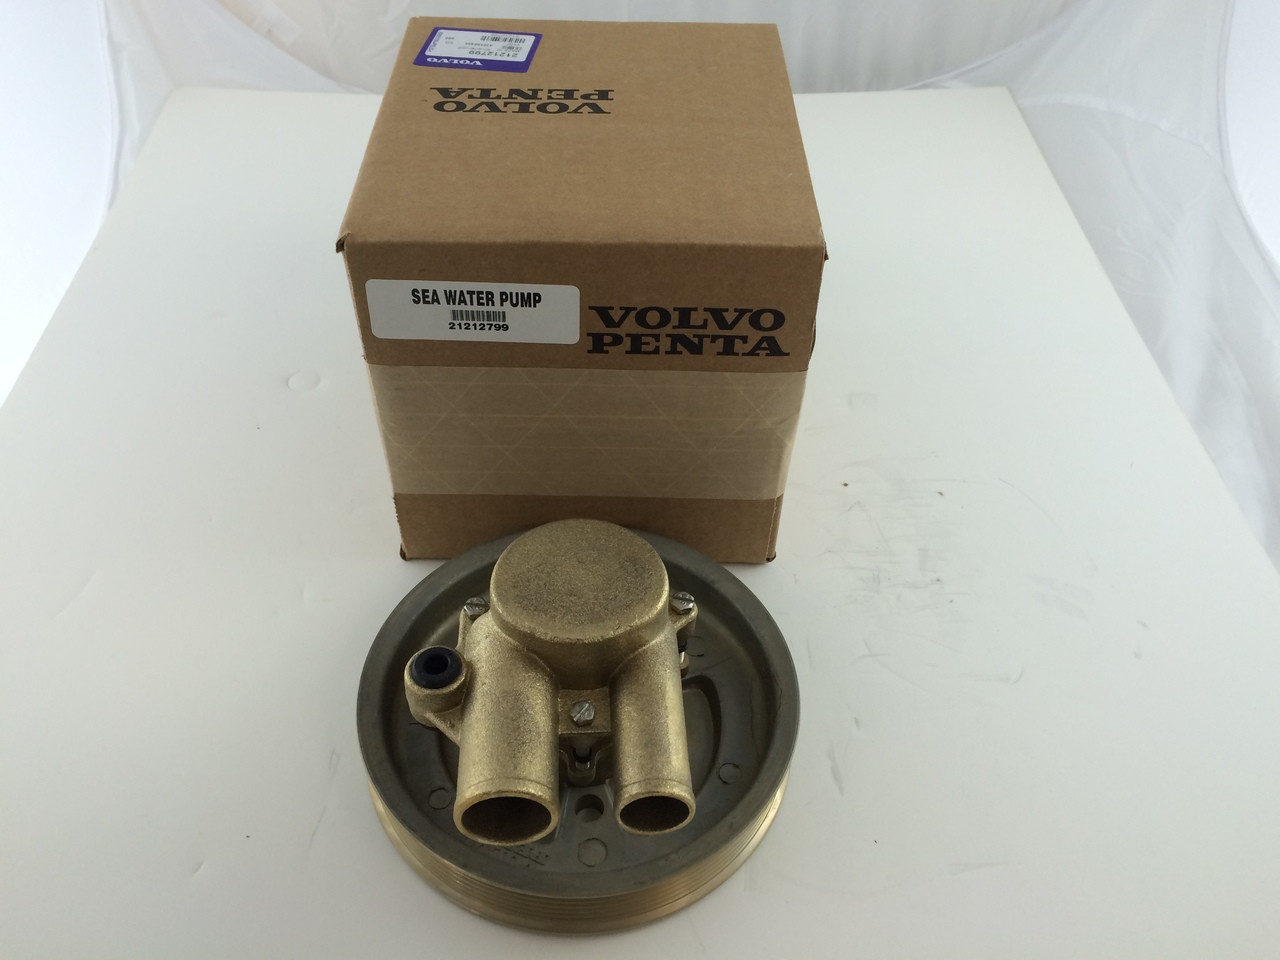 $469.99* GENUINE VOLVO  no tax* SEA WATER PUMP 21212799 *In Stock & Ready To Ship!